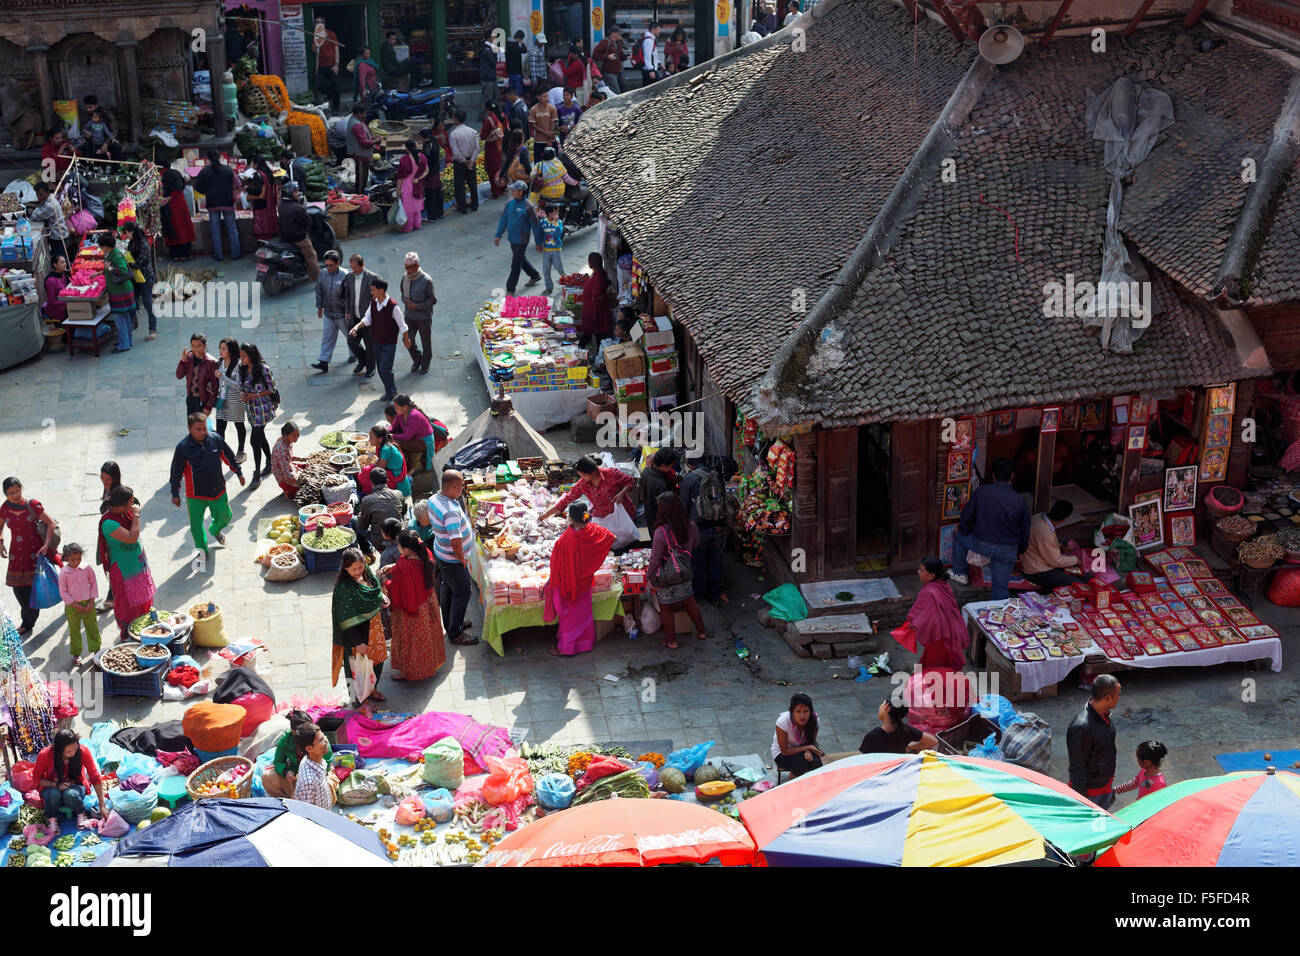 Kathmandu, Nepal - November 2, 2013: buyers and sellers at a busy street market in Kathmandu with groceries, fruits and clothes Stock Photo